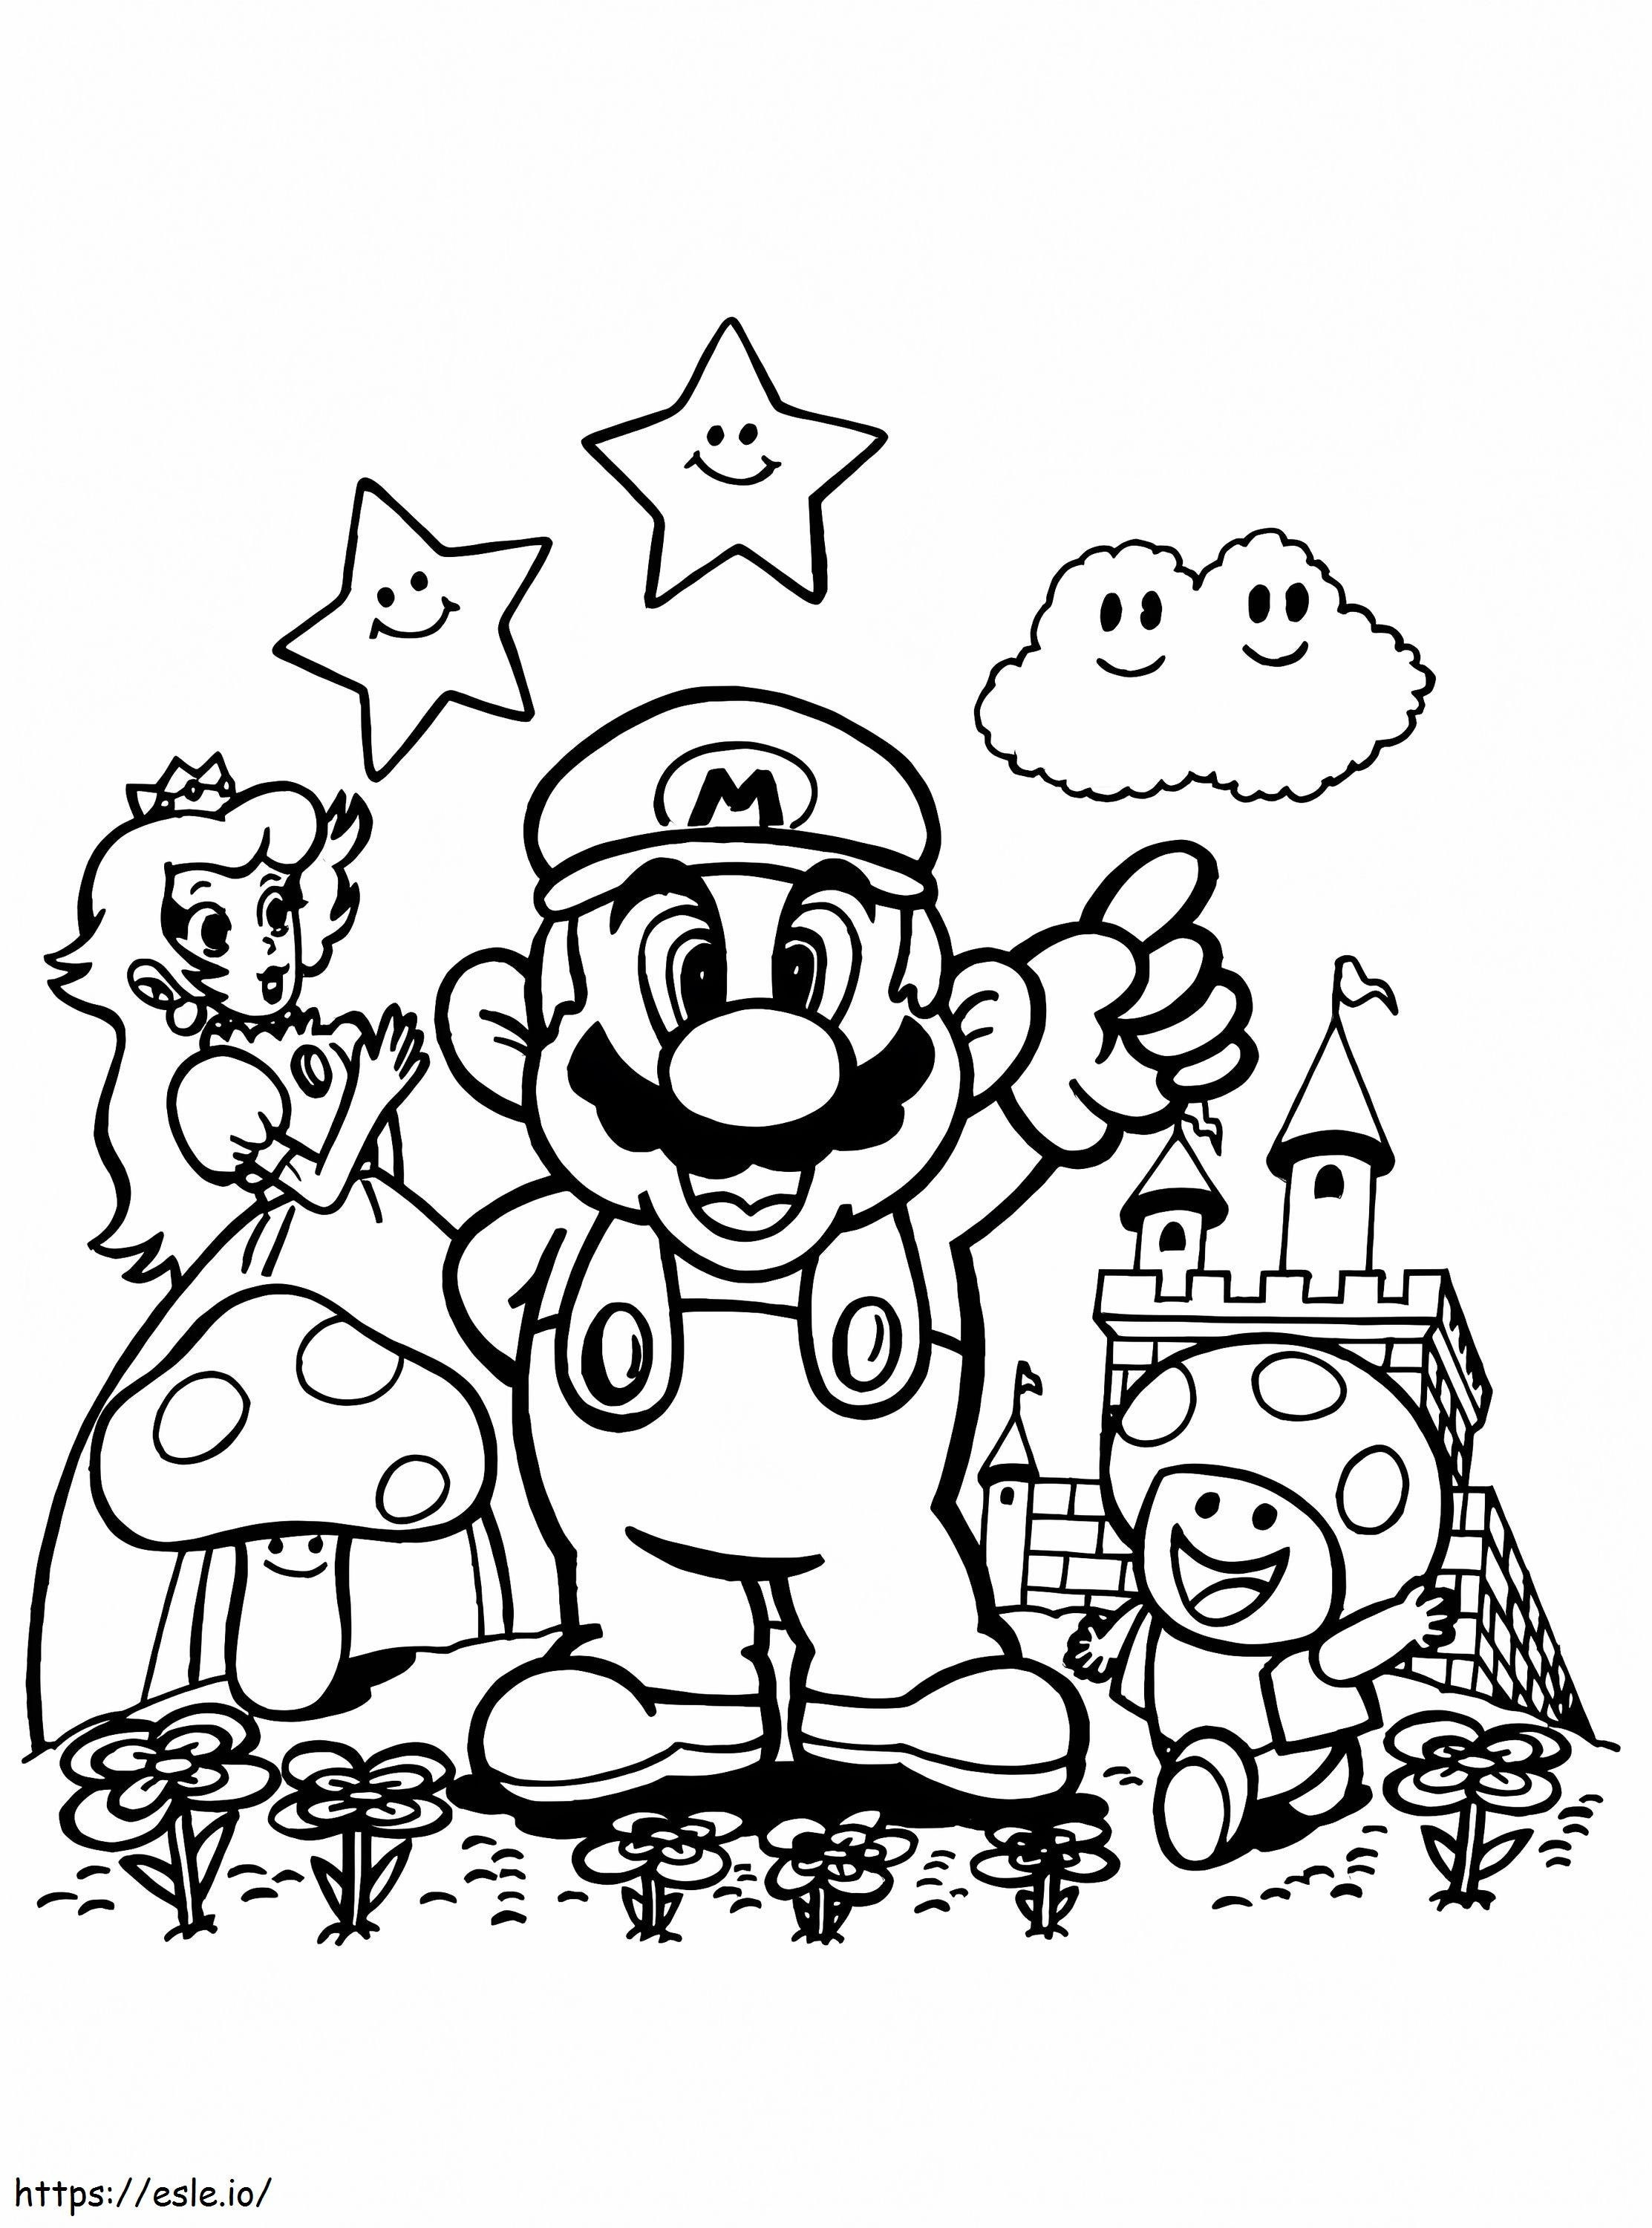 Mario And Friend coloring page